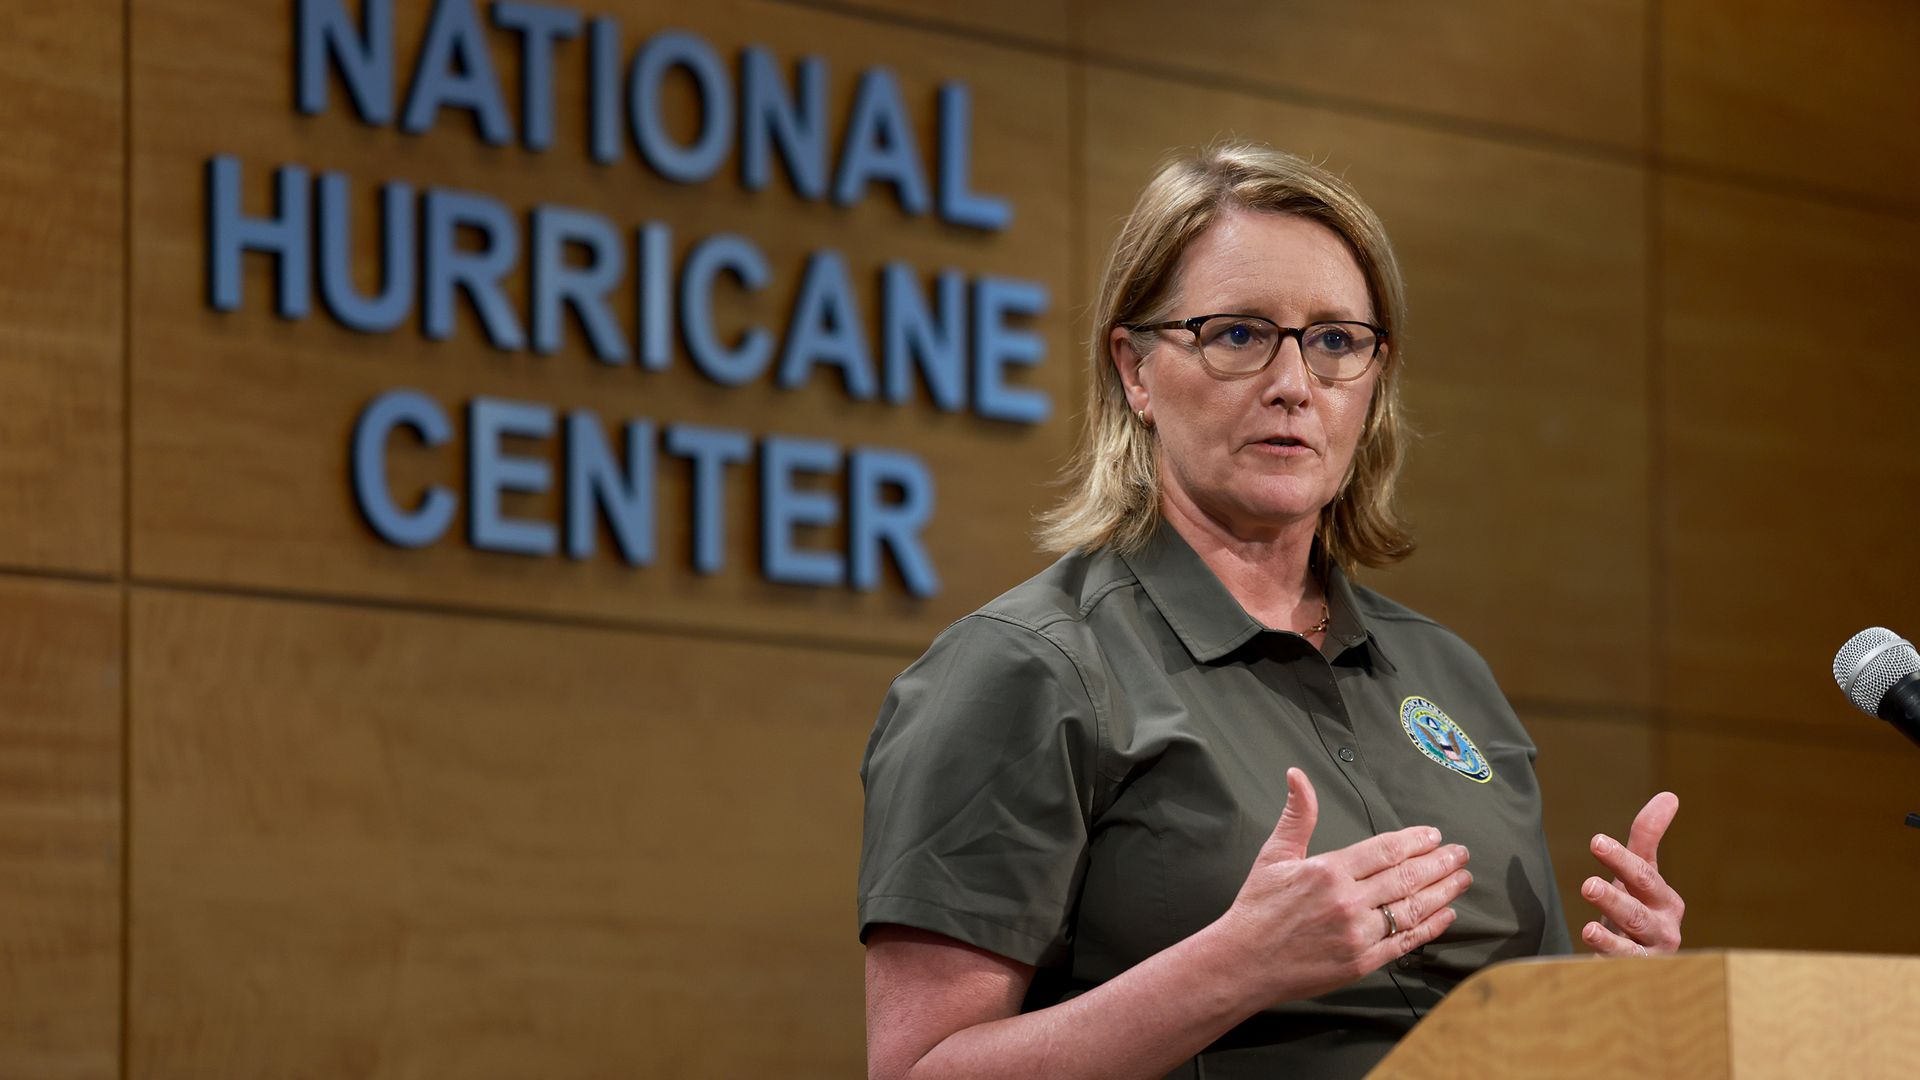 FEMA Administrator Deanne Criswell speaking at the National Hurricane Center in May 2023 in Miami, Florida.